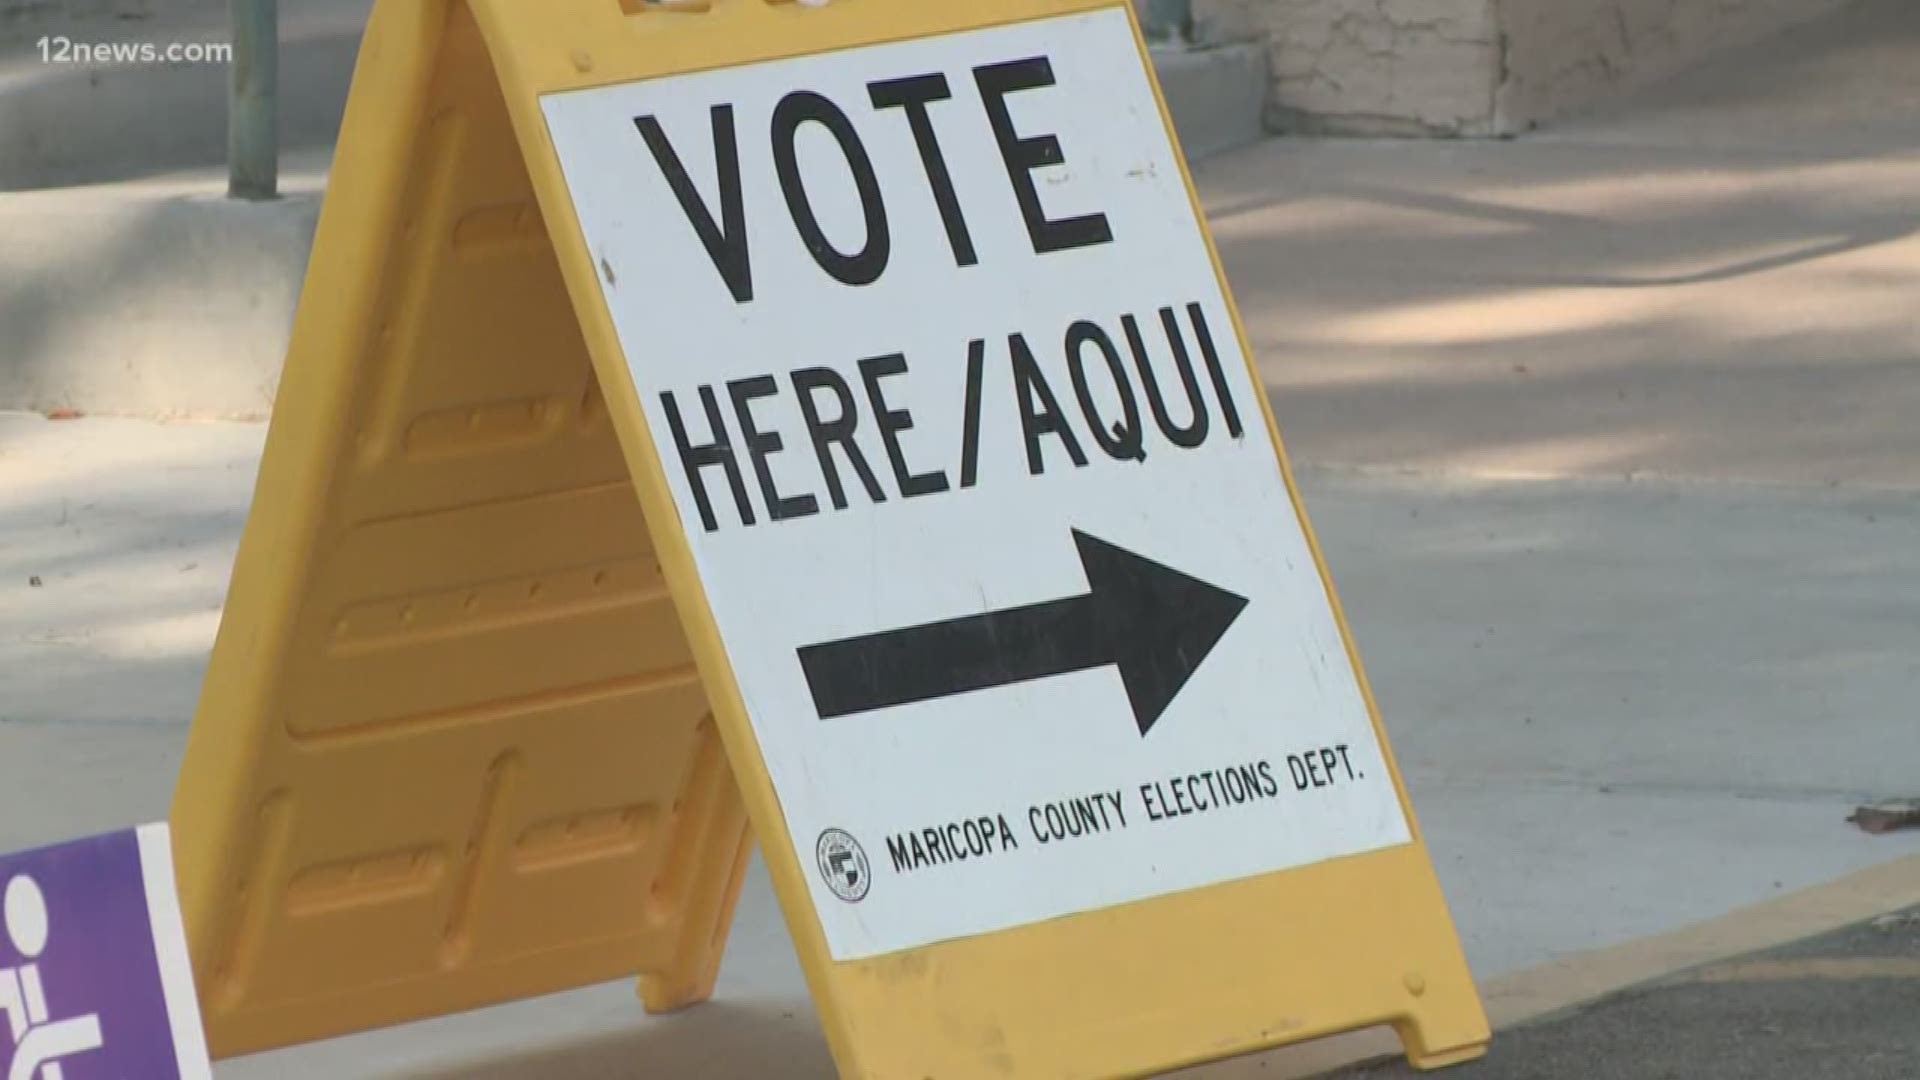 A record number of voters came out to cast their ballots or mailed them in early. Political insider Brahm Resnik rounds up the results of this record-setting primary election.